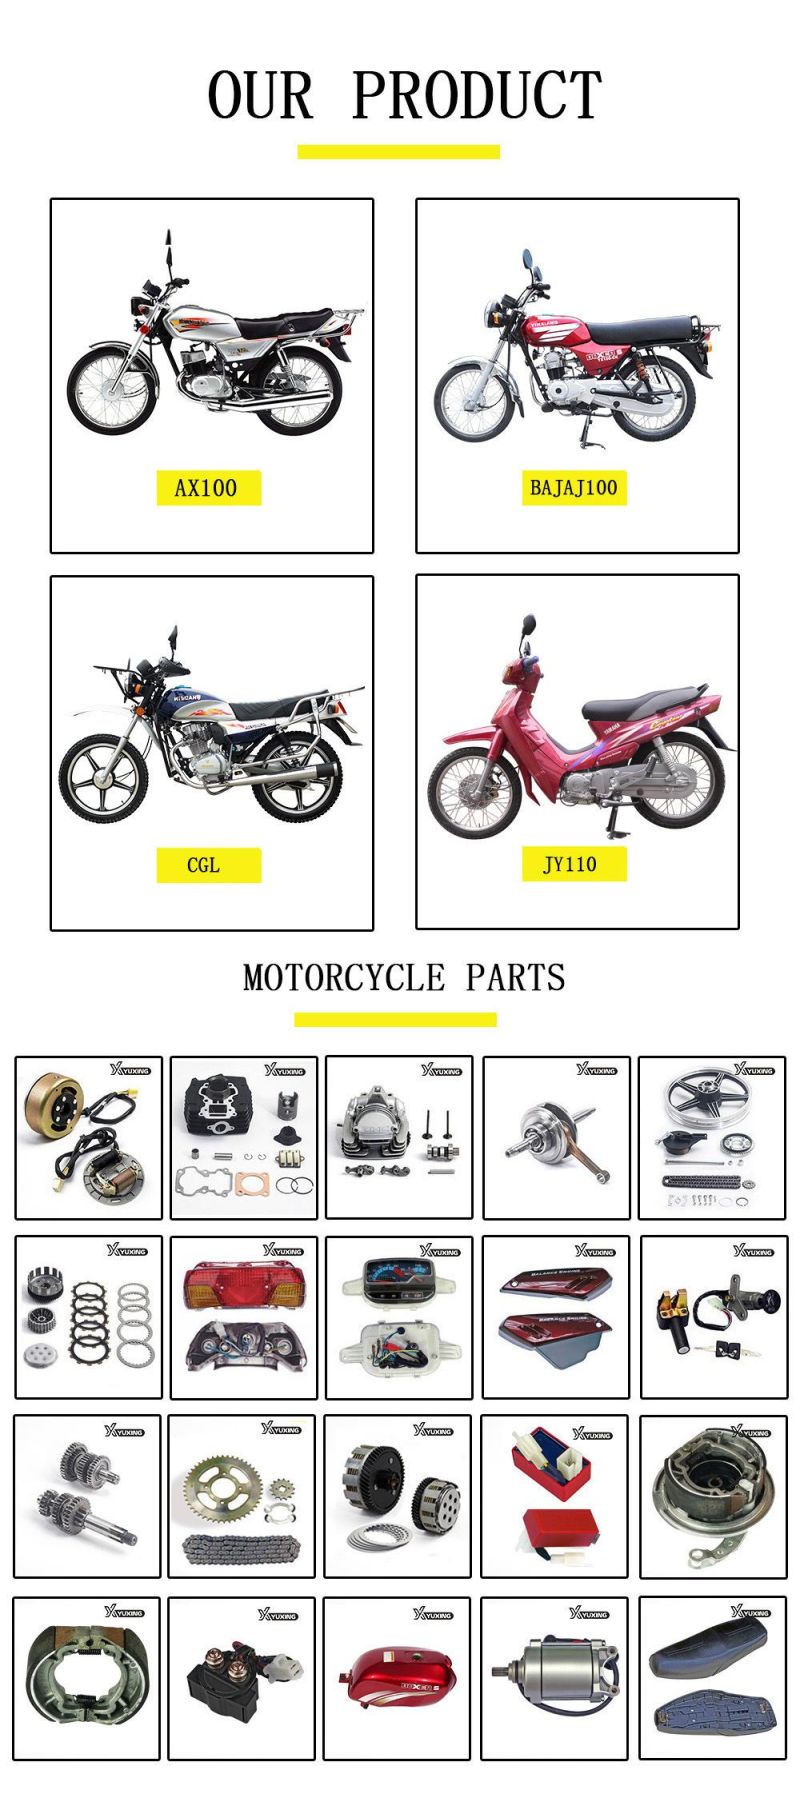 Mf12V7-1A Motorcycle Spare Parts Maintenance-Free Rechargeable Motorcycle Battery